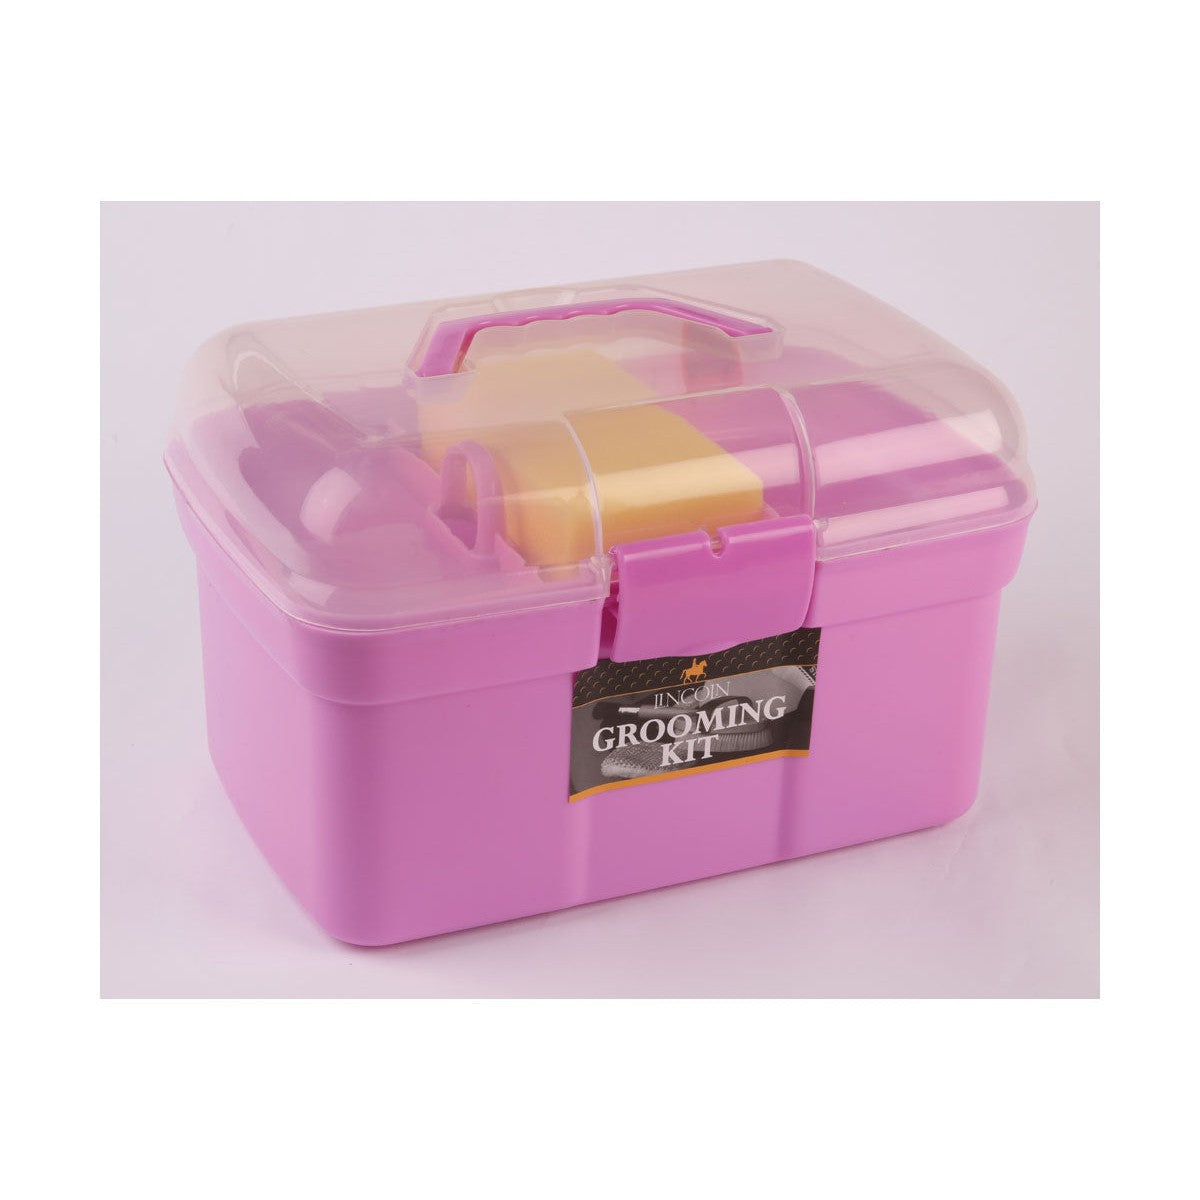 Lincoln Grooming Kit Pink 